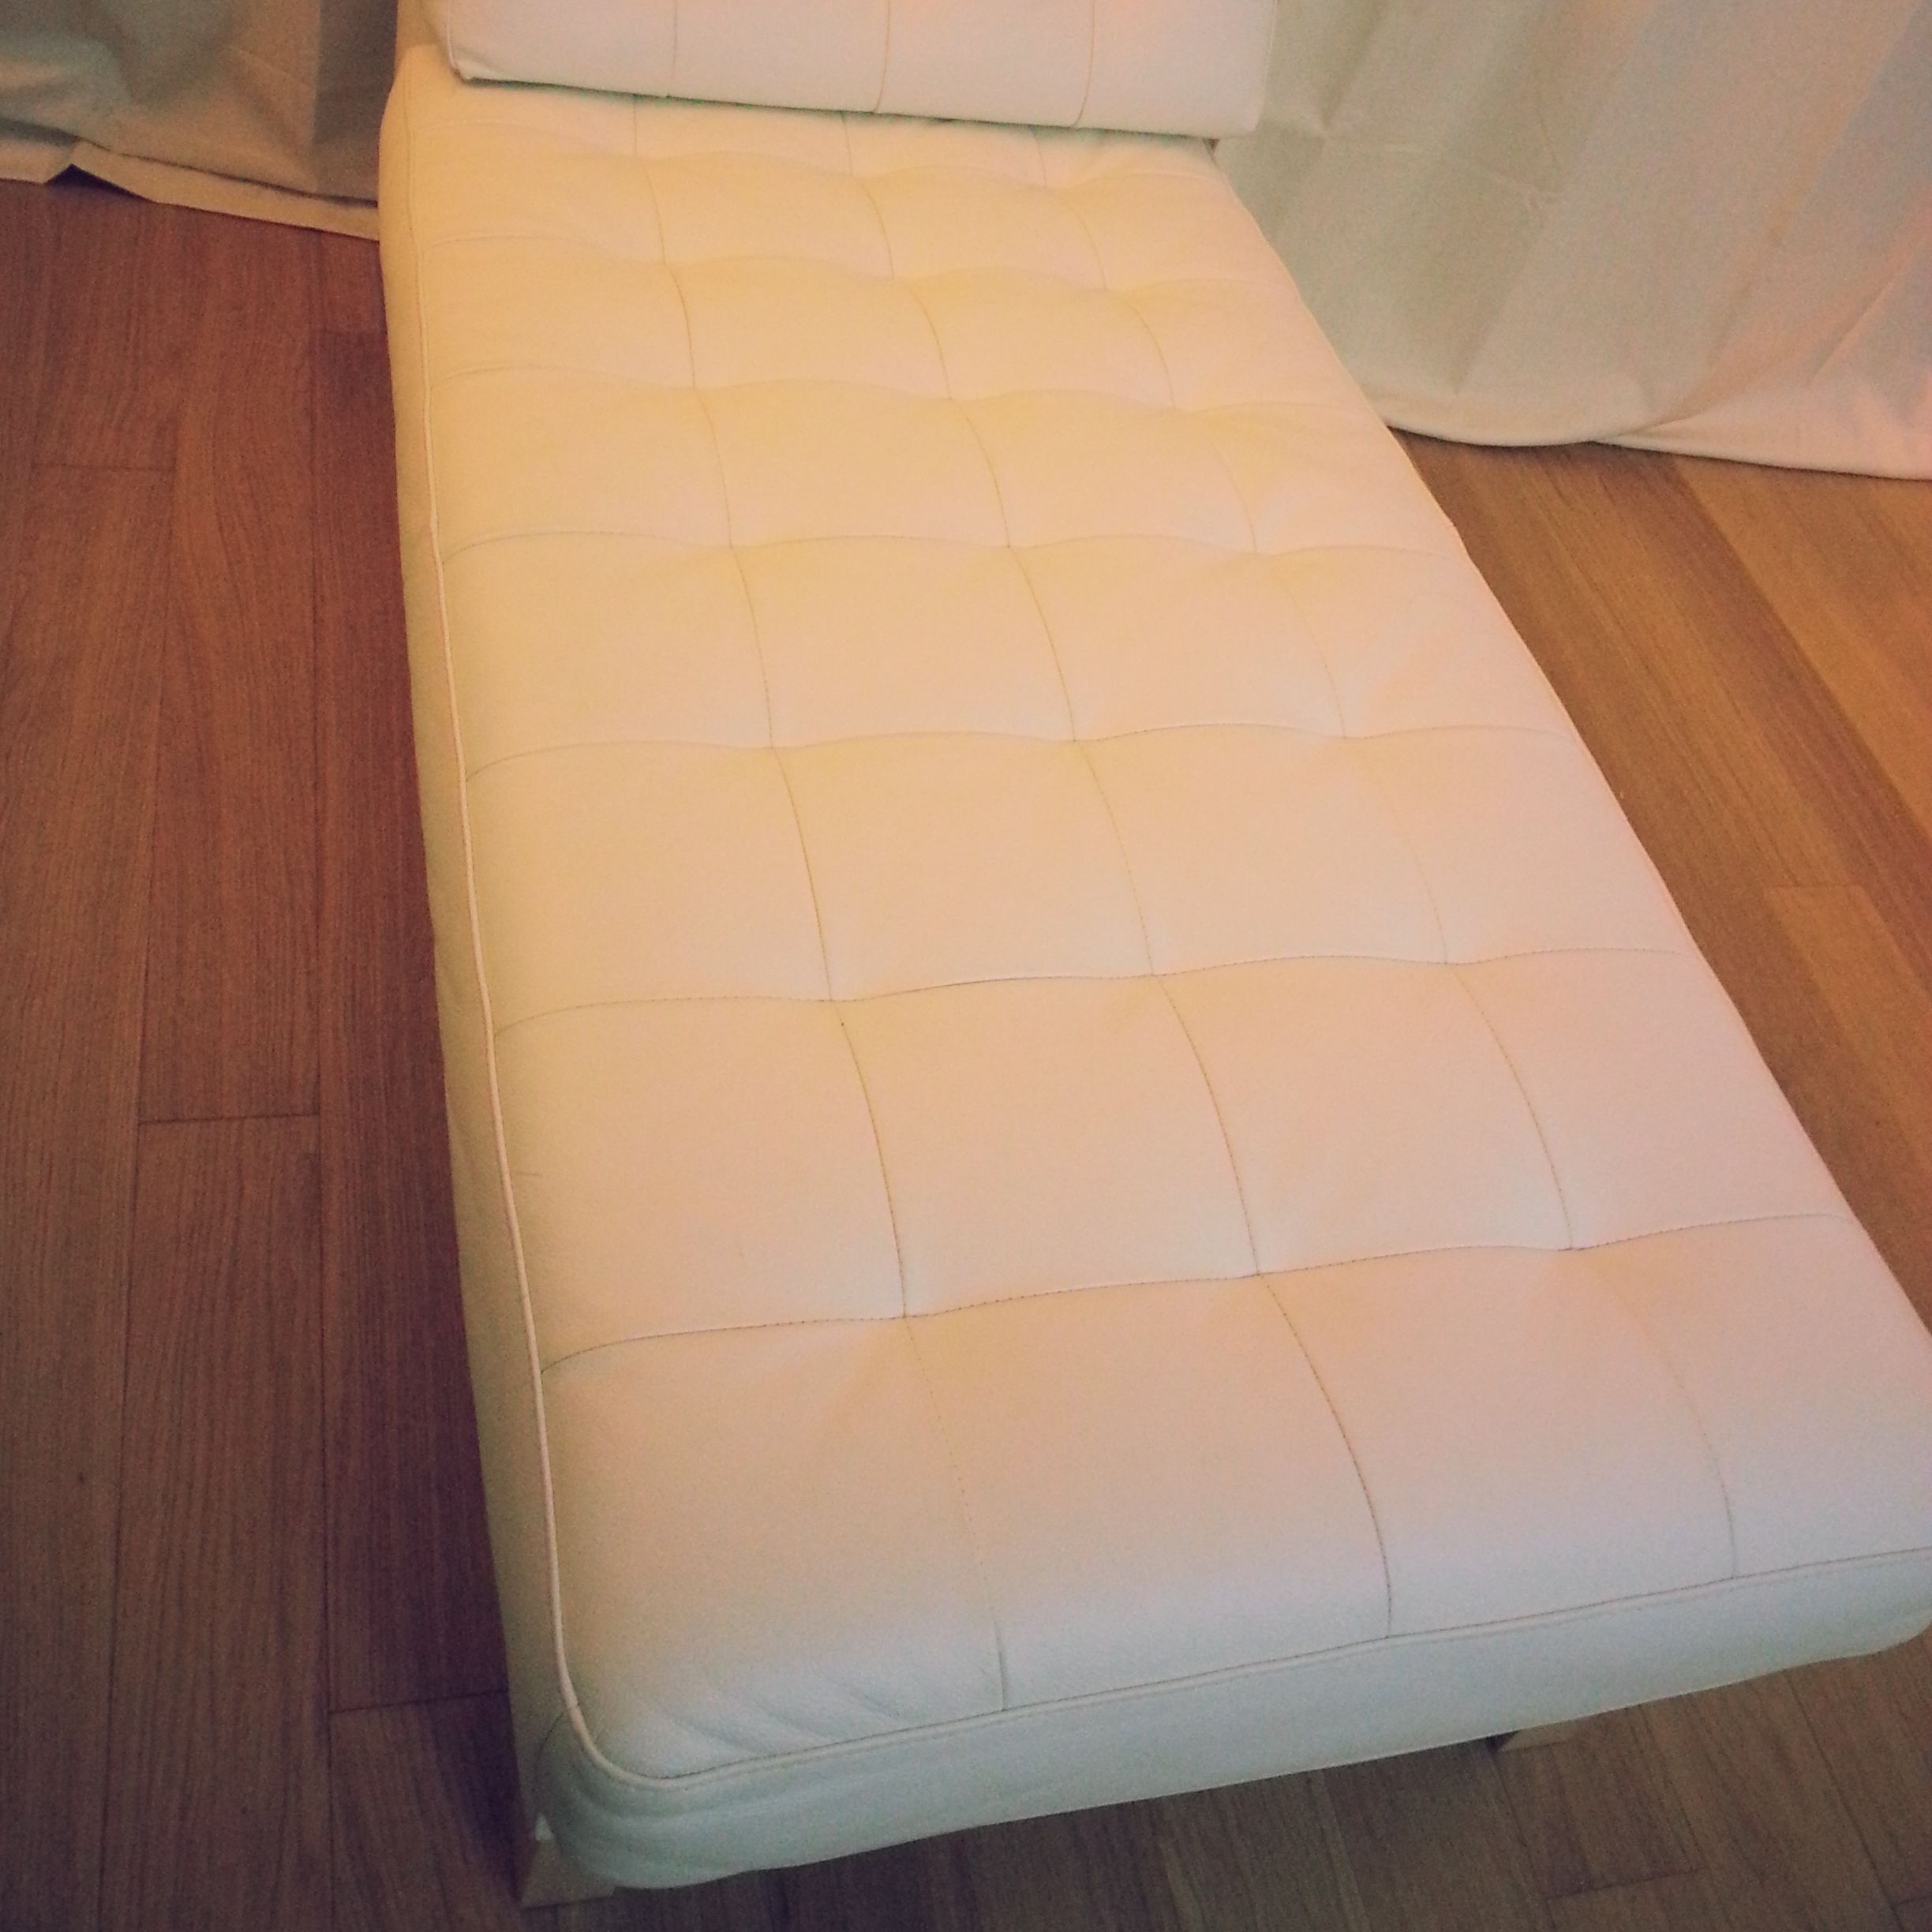 Beukende modus stroomkring Ikea Karlsfors - Chaise longue, real white leather - Apartment Therapy's  Bazaar.